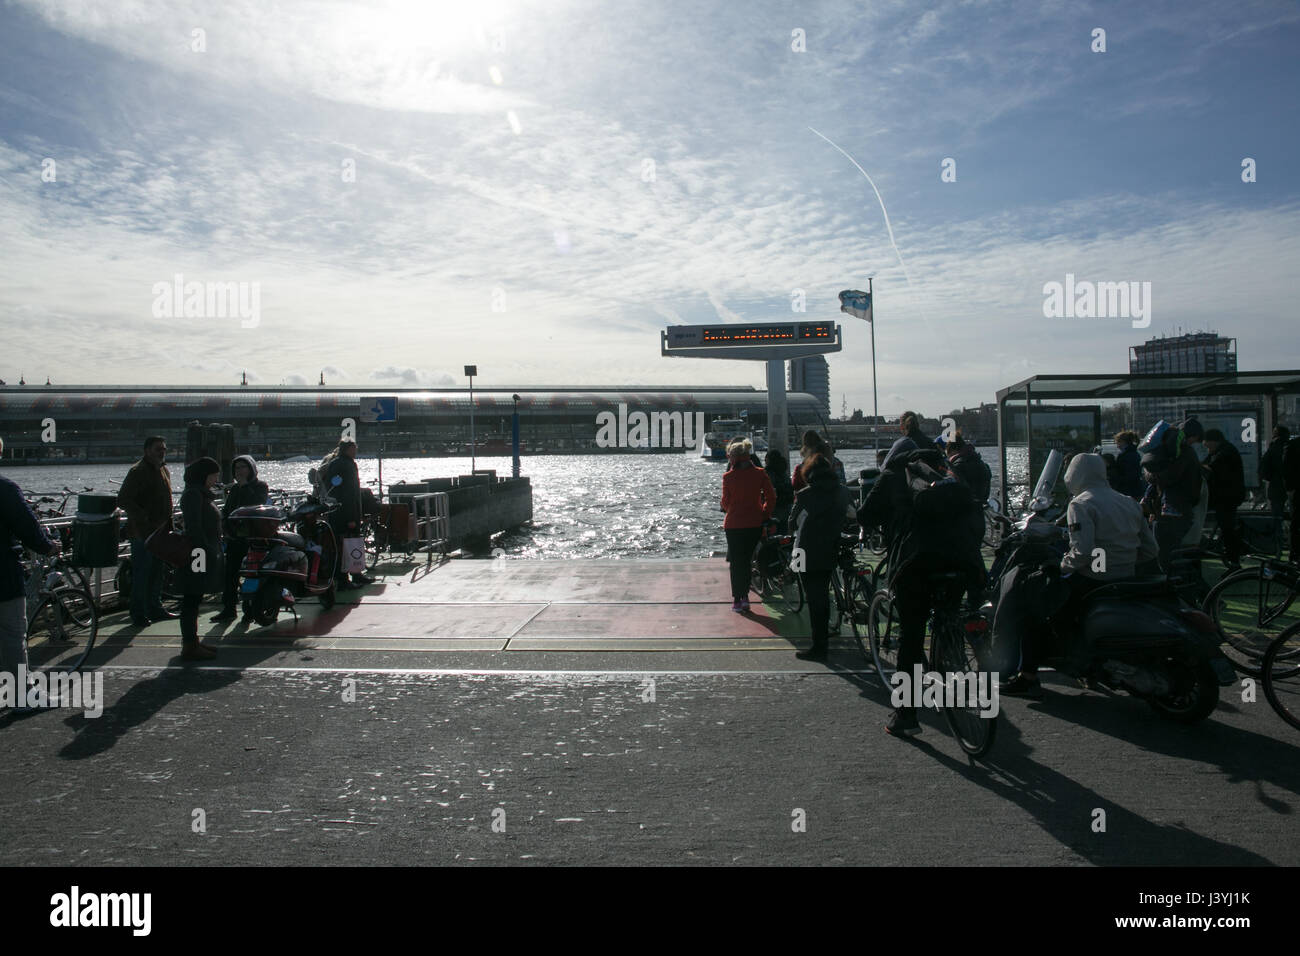 view of the ferry dock in Amsterdam Stock Photo